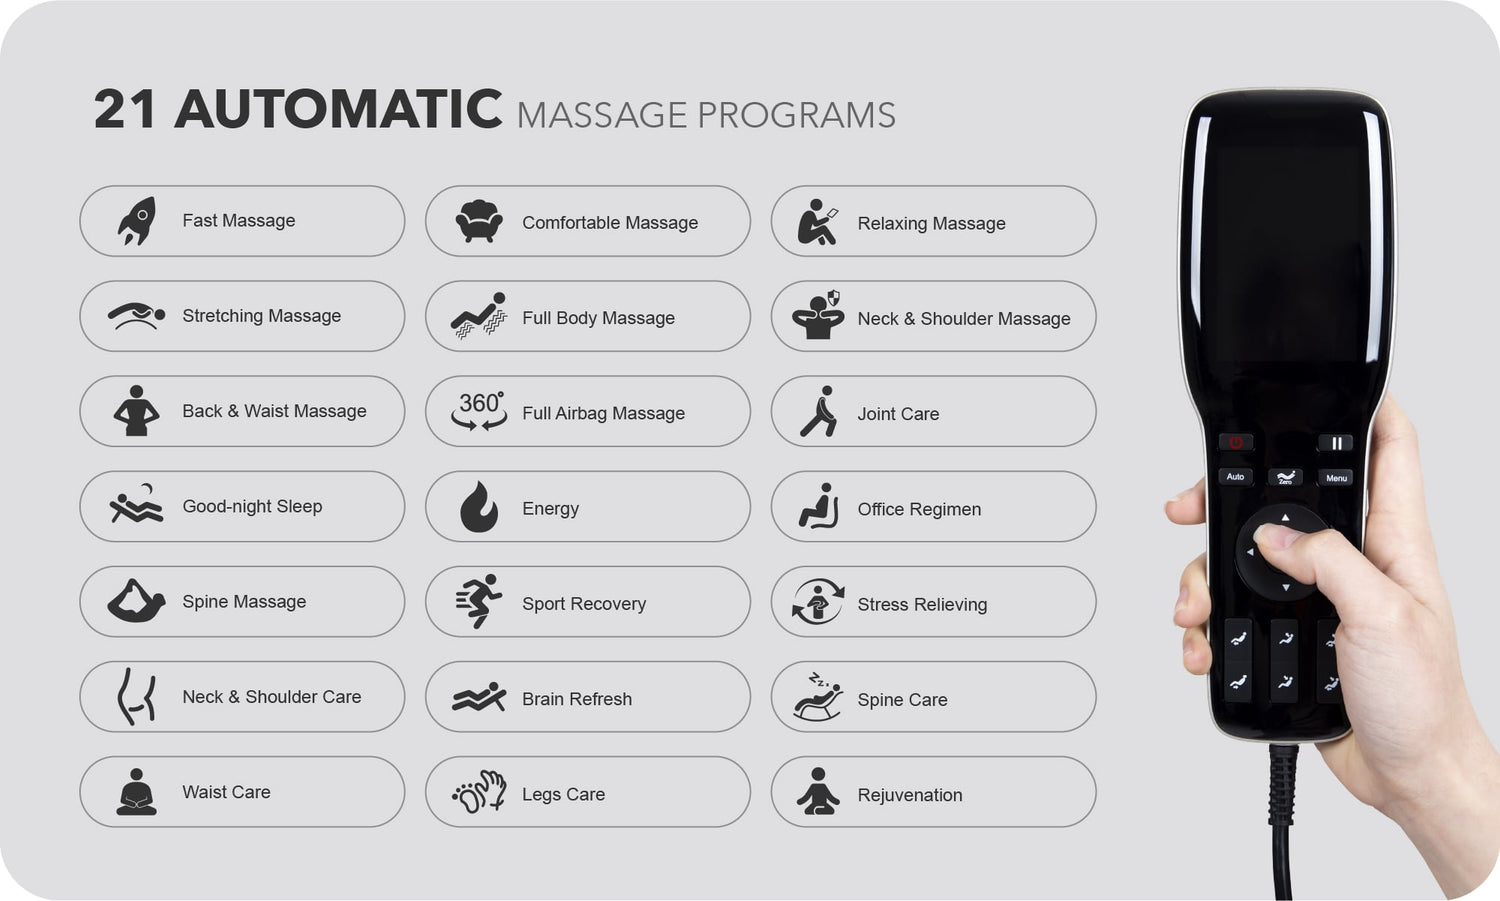 Awesome User Experience With 21 Auto Massage Programs